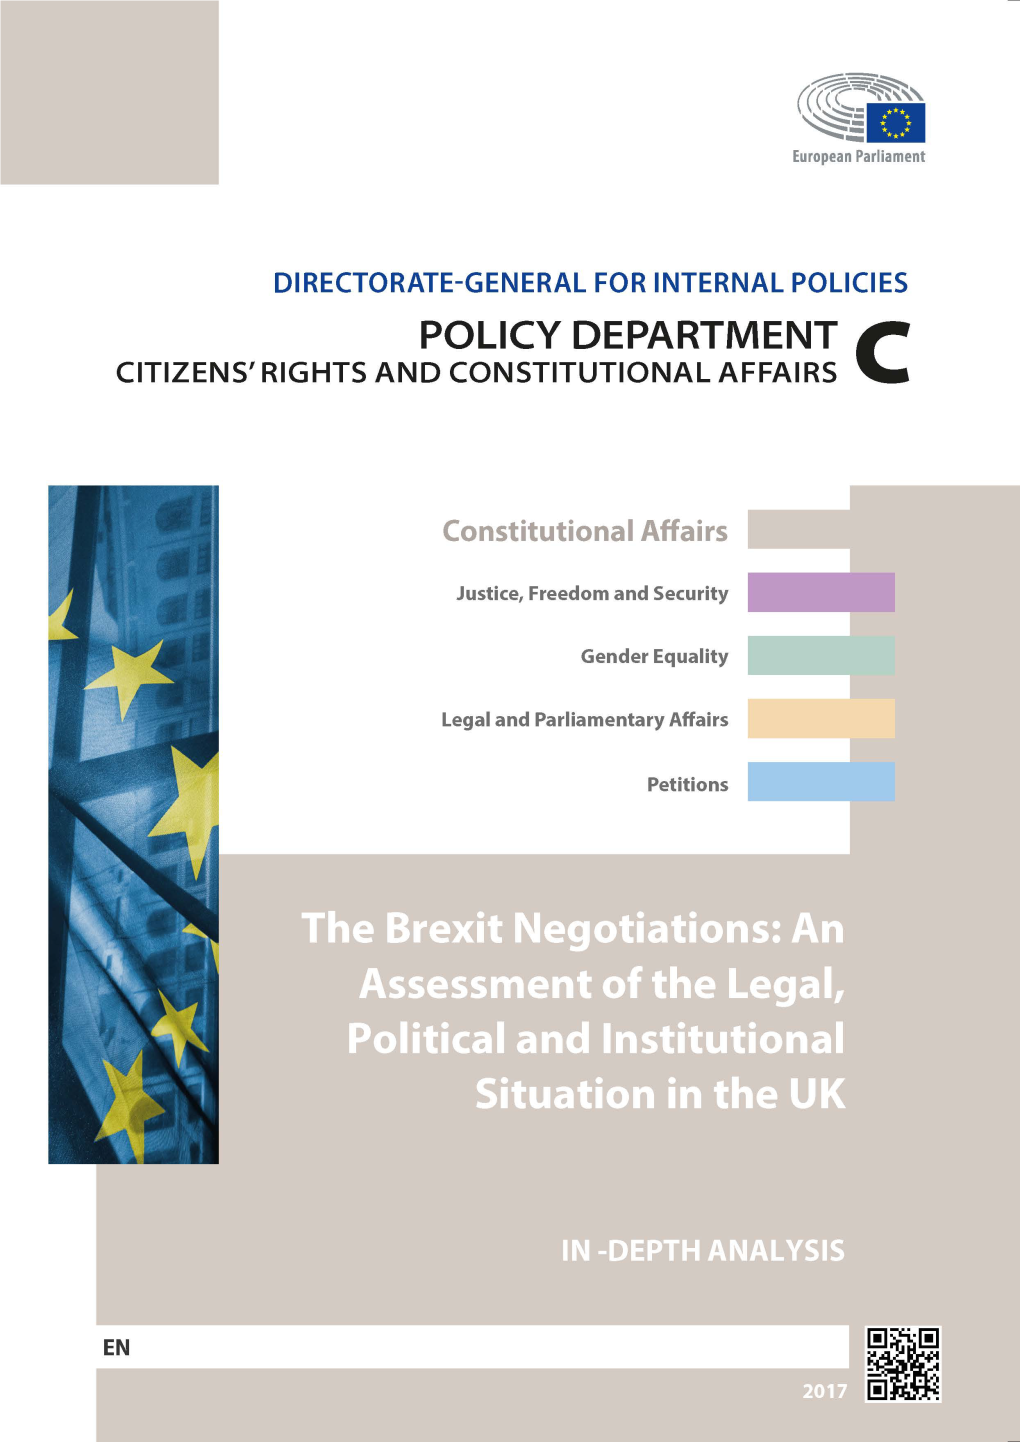 The Brexit Negotiations: an Assessment of the Legal, Political and Institutional Situation in the UK